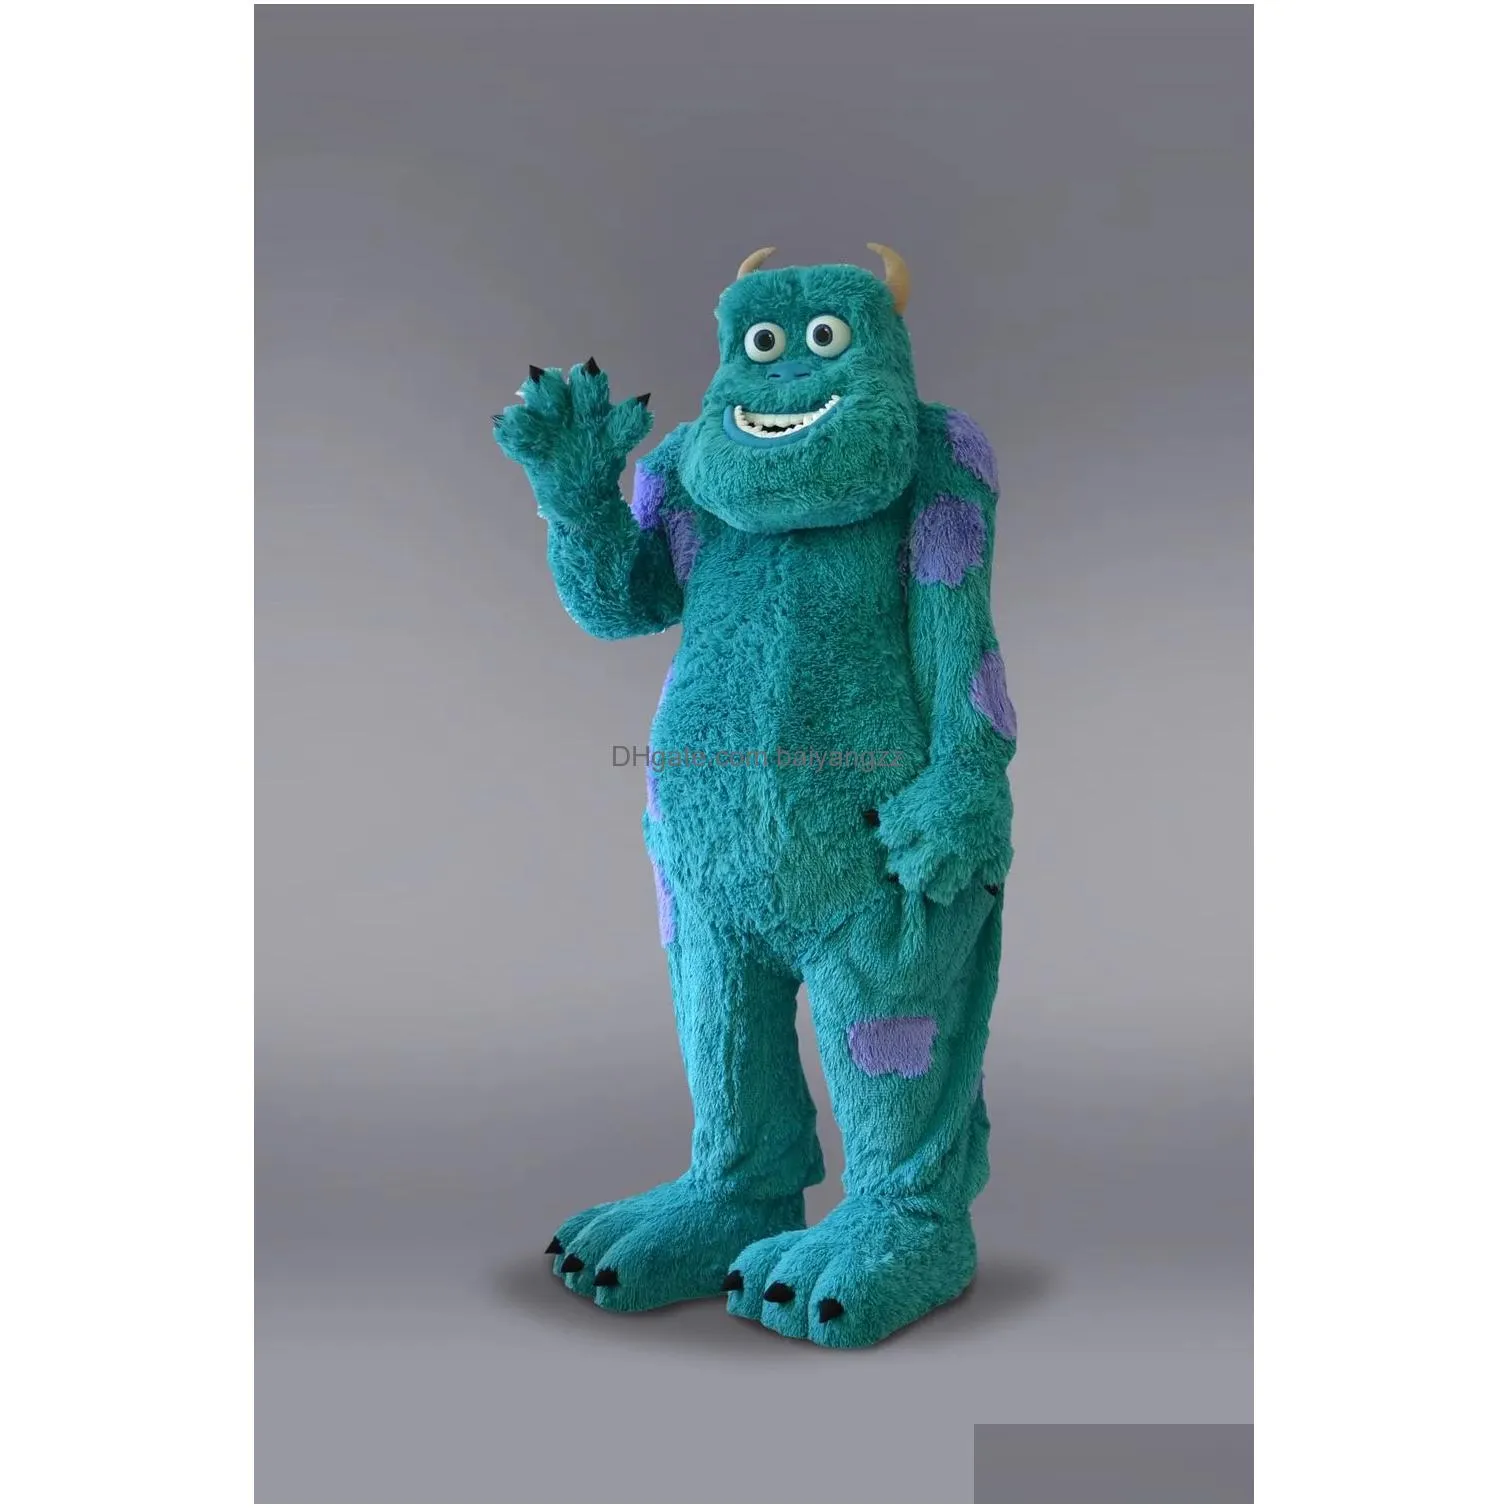 Mascot Scary Blue Monster Costume ADT Size Halloween Street Funny Drop Delivery Apparel Costumes DHZR9